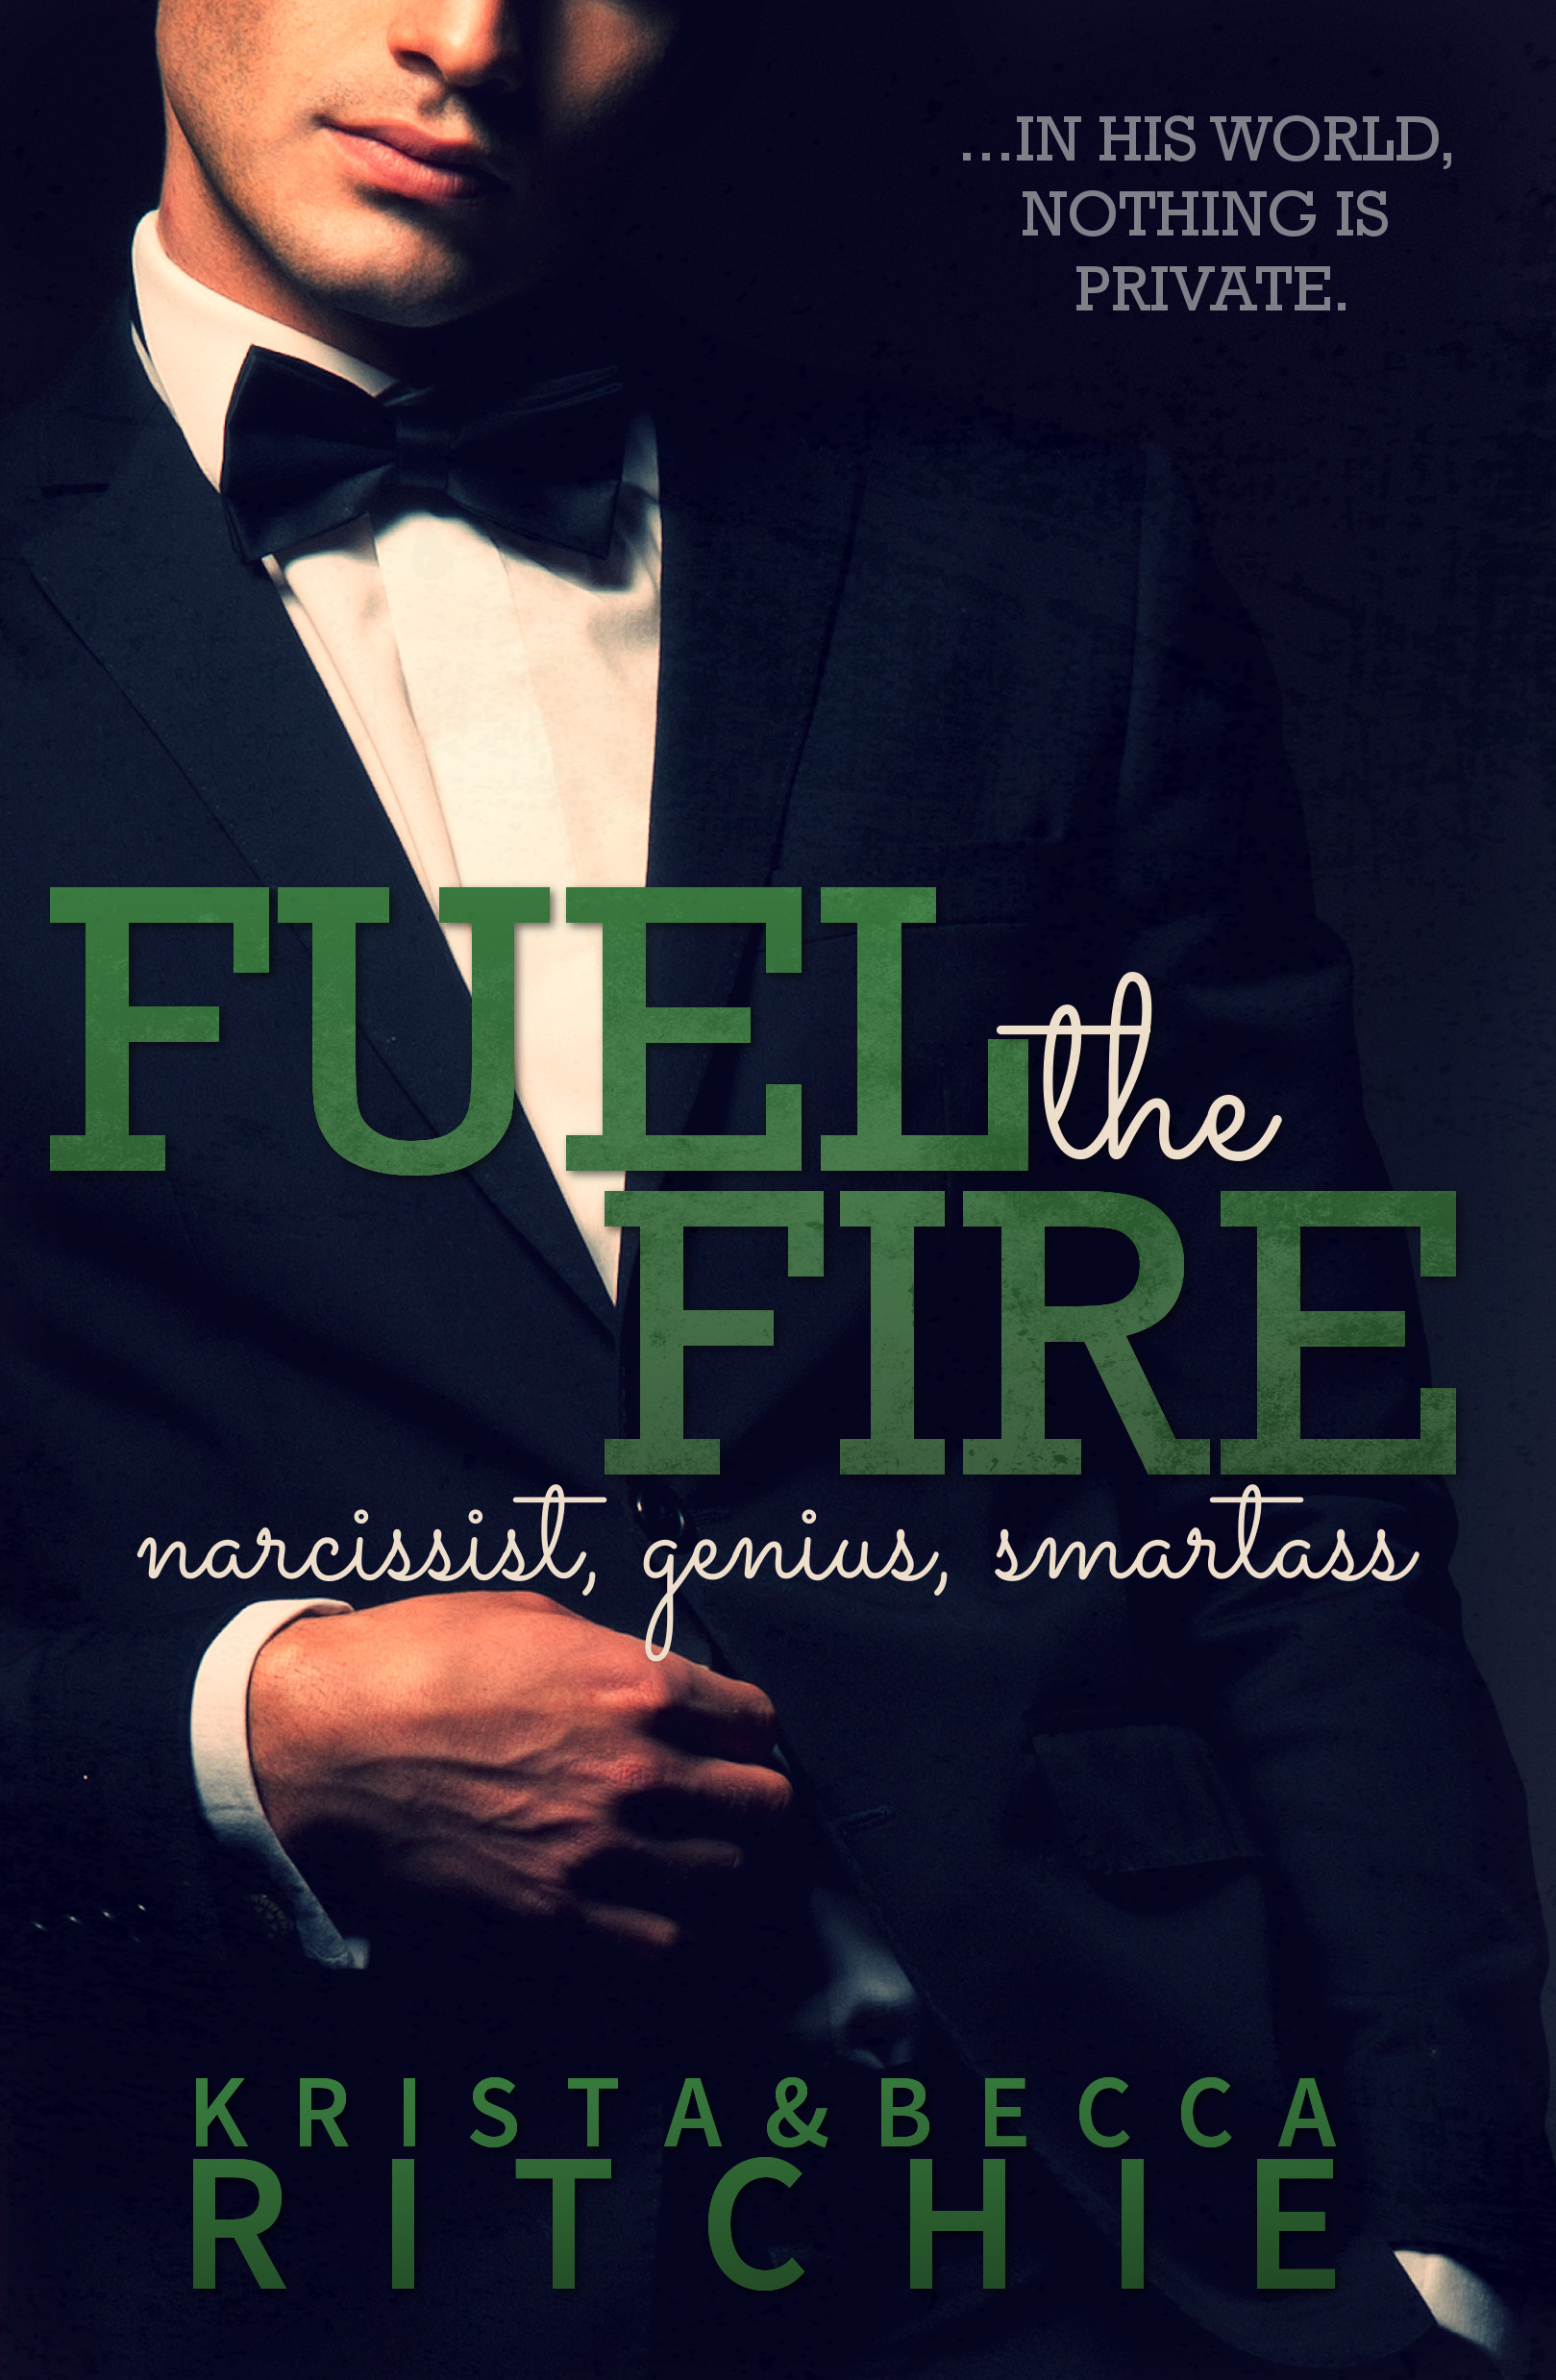 Fuel the Fire Cover